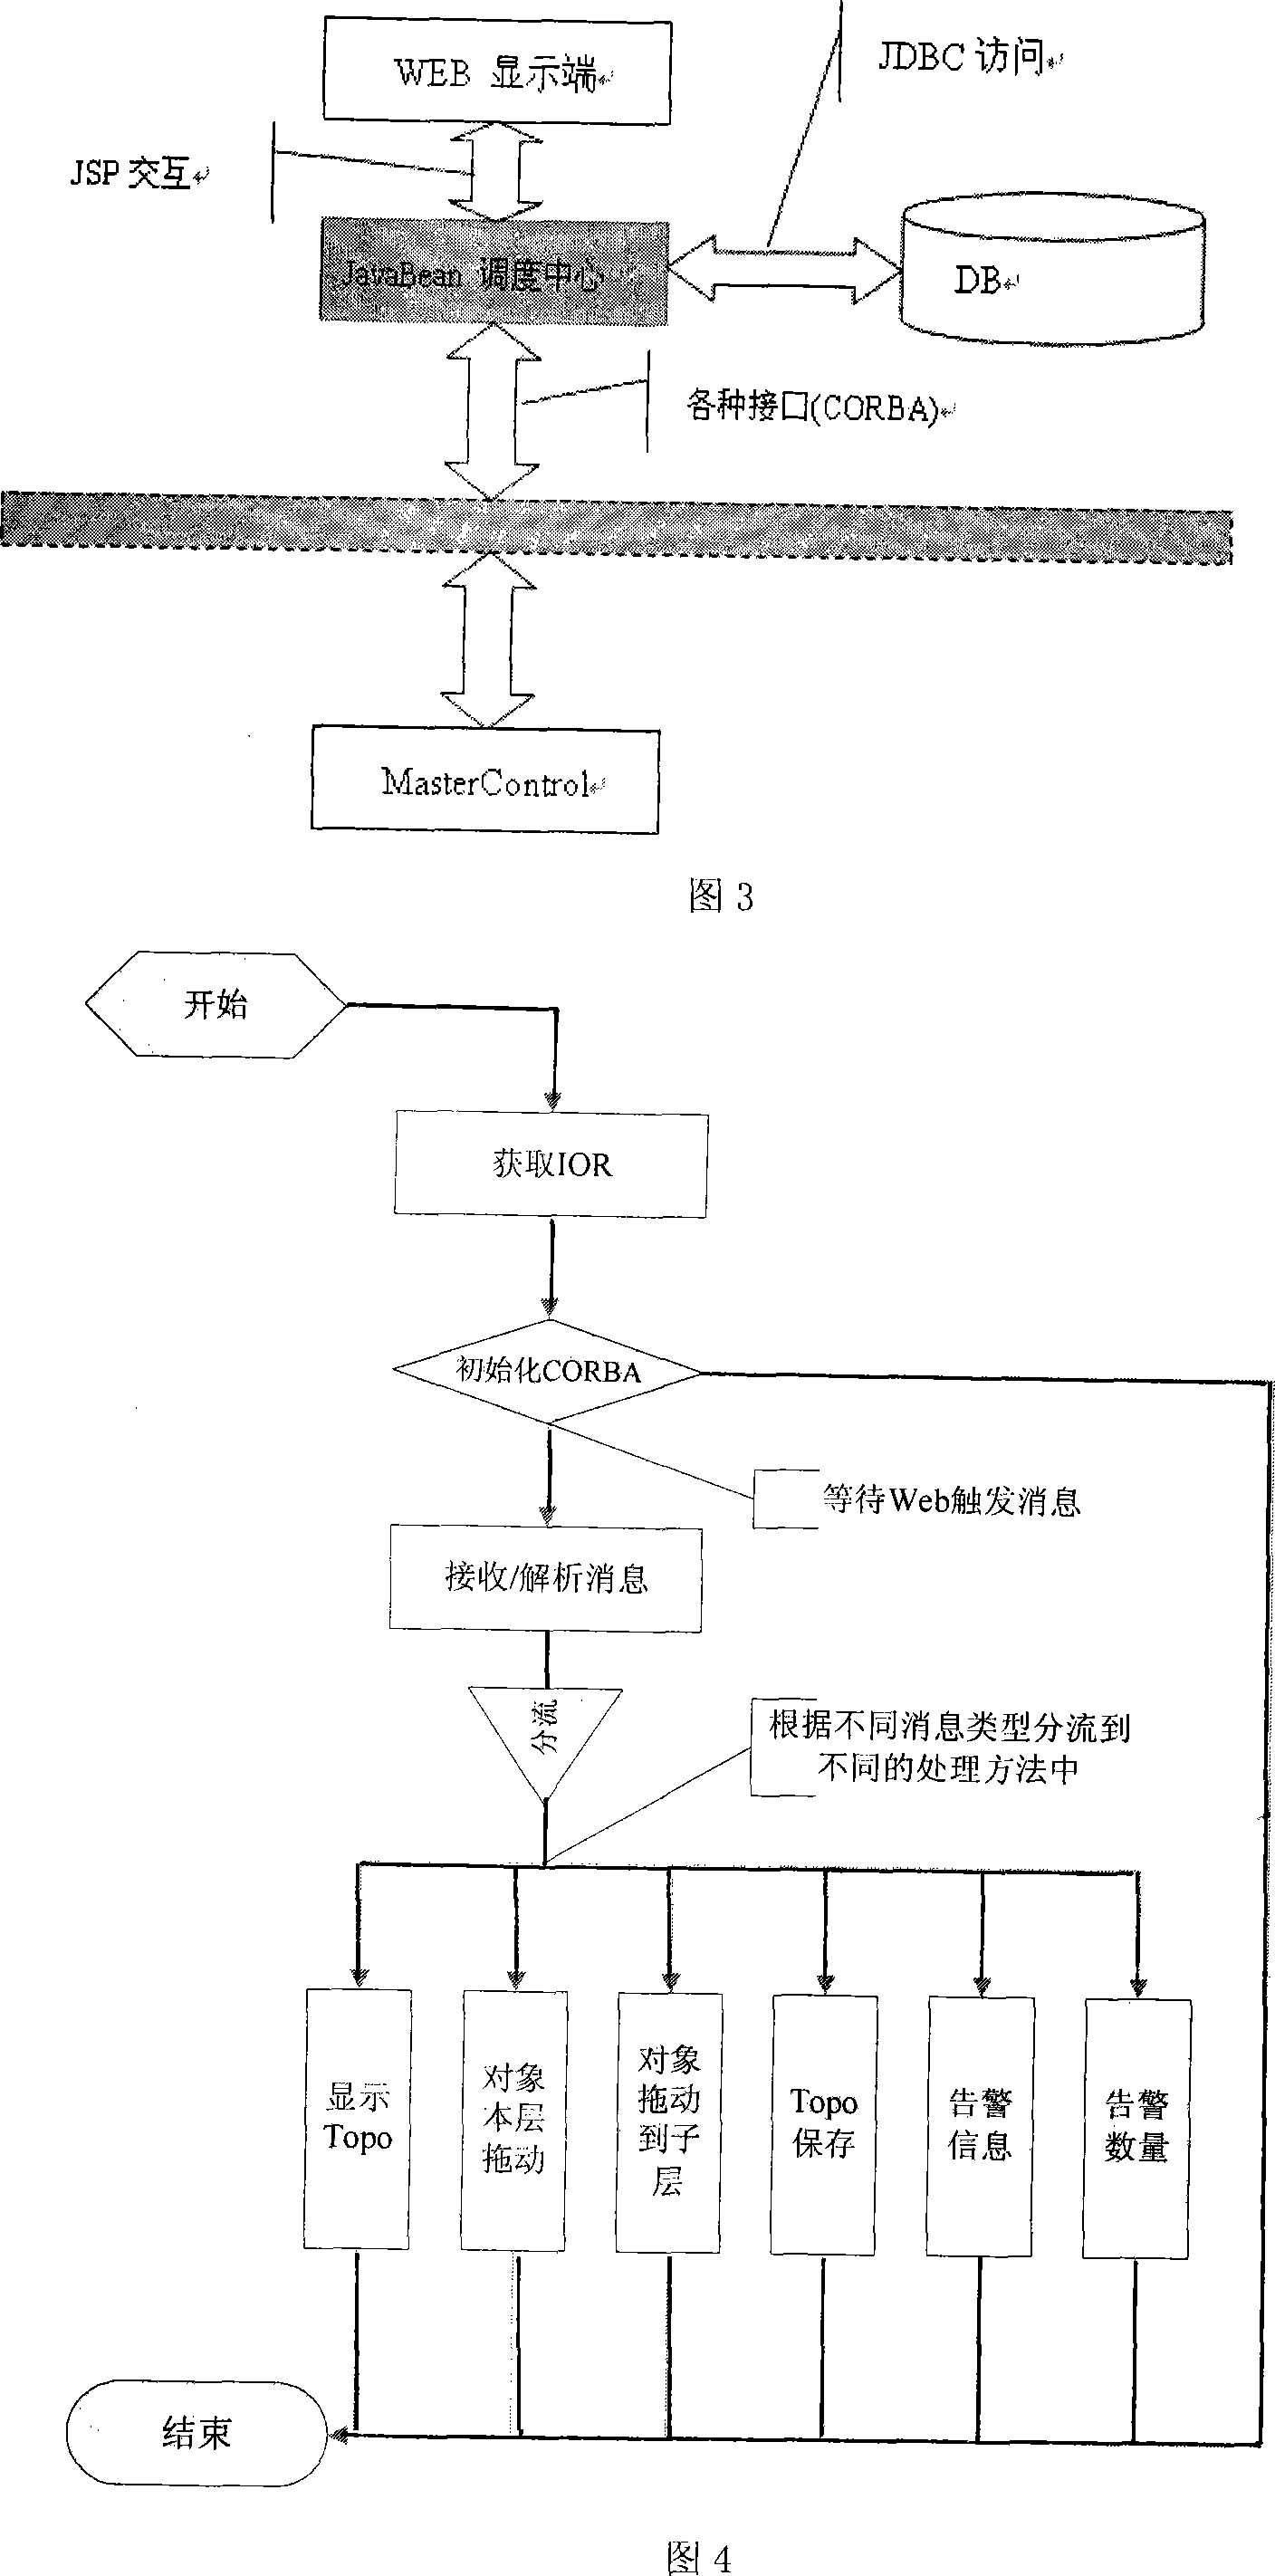 Method for video monitoring system to implement Topo map of network devices on web